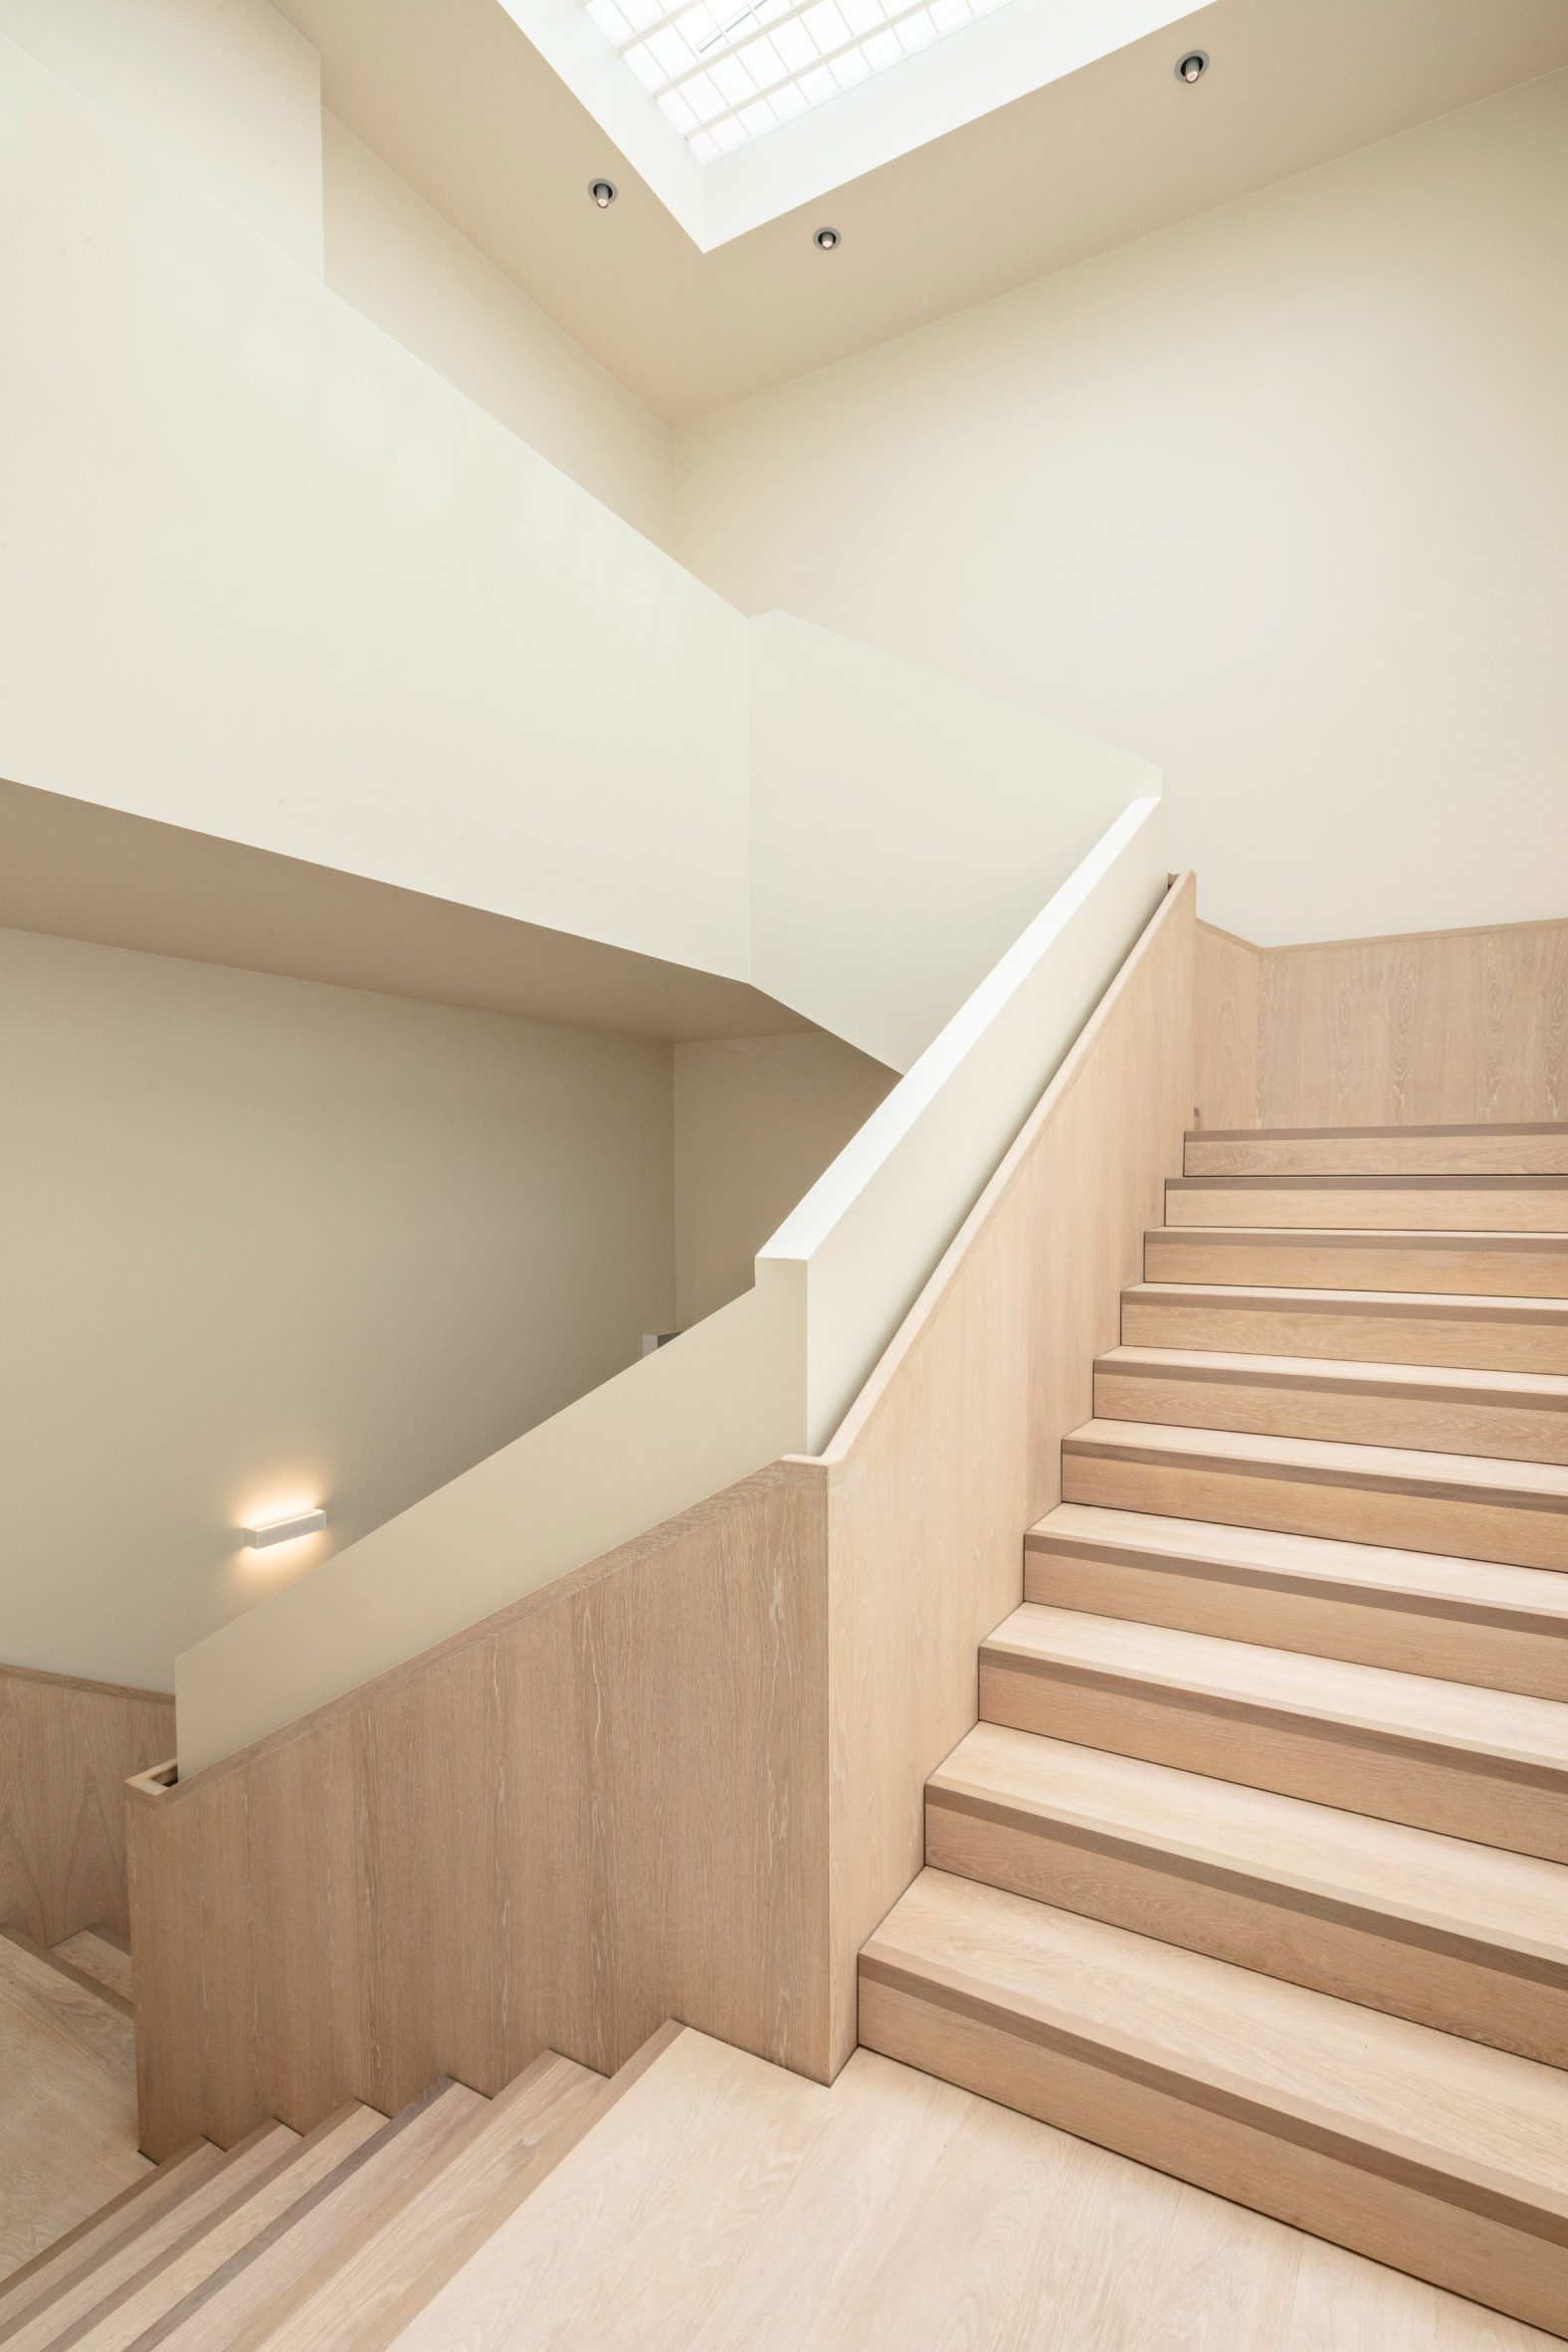 Light timber stairwell in Snohetta extension to Ordrupgaard Museum